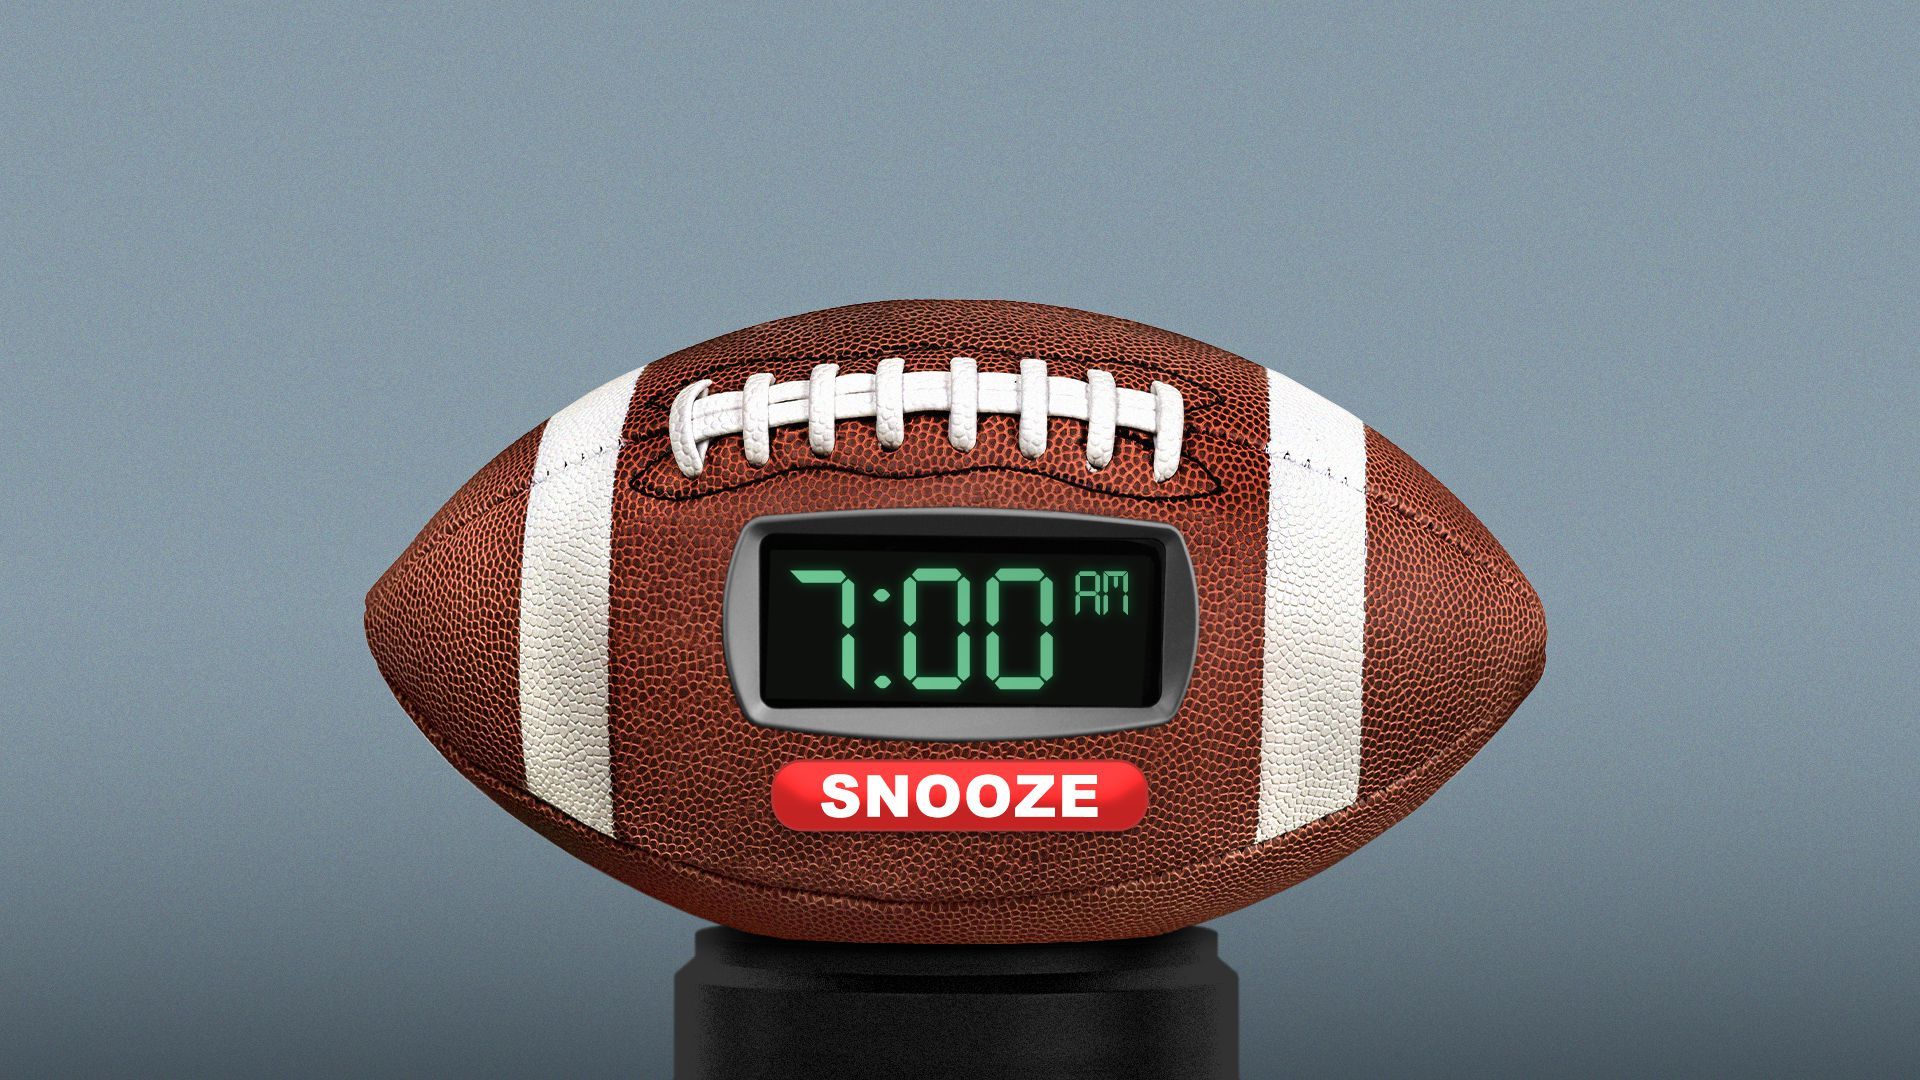 Illustration of a football shaped alarm clock with a big 